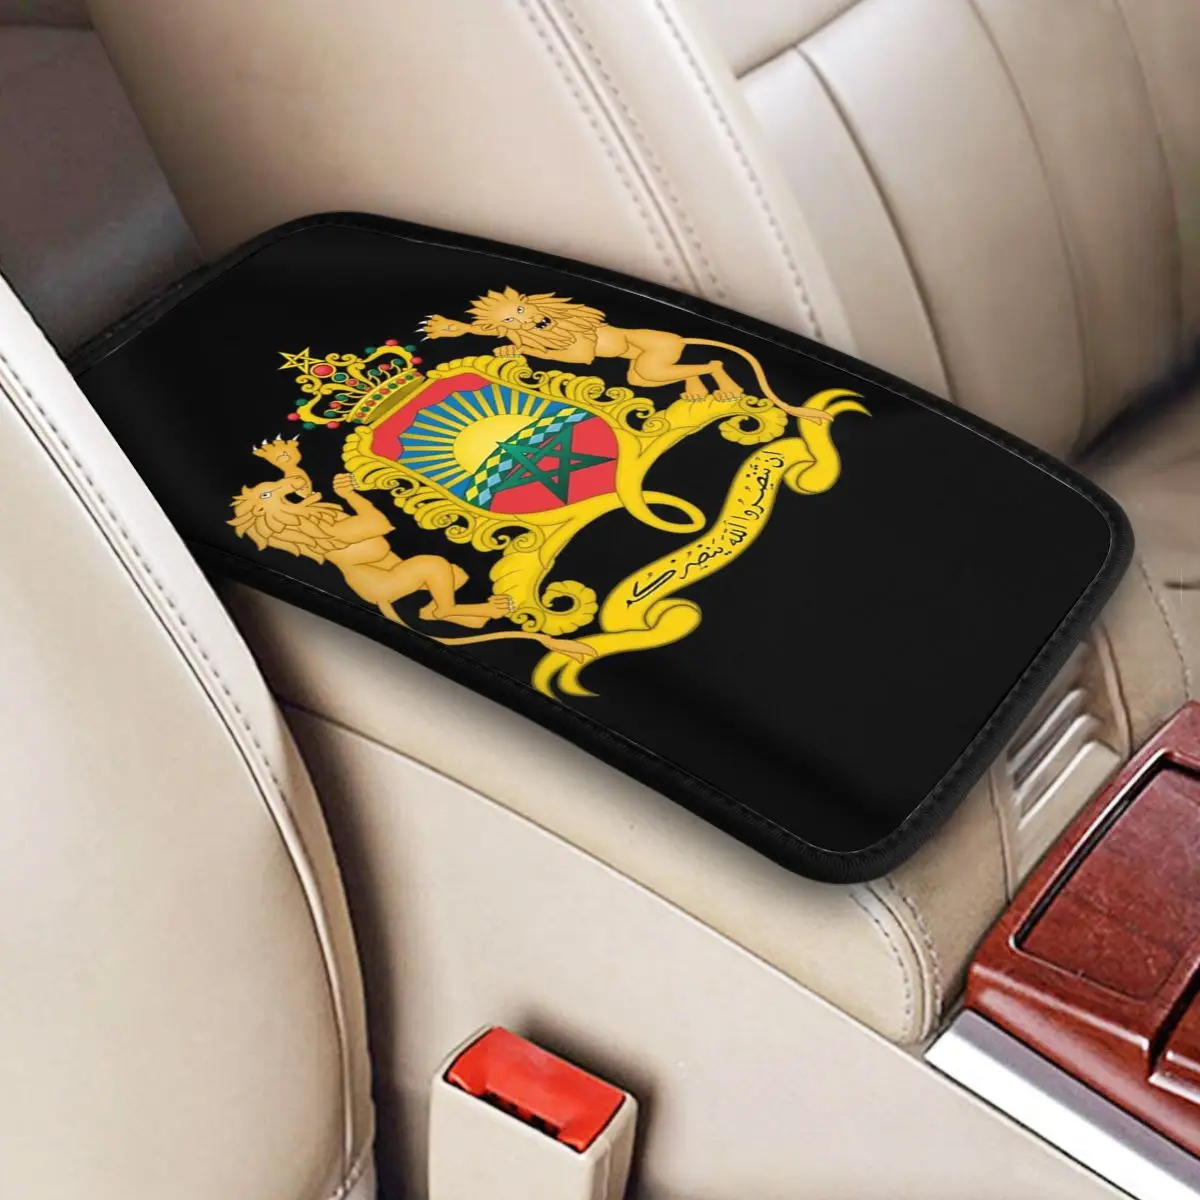 

Morocco Of Arms National Moroccan Emblem Car Armrest Cover Mat Kingdom of Morocco Center Console Cover Pad Car Accessories